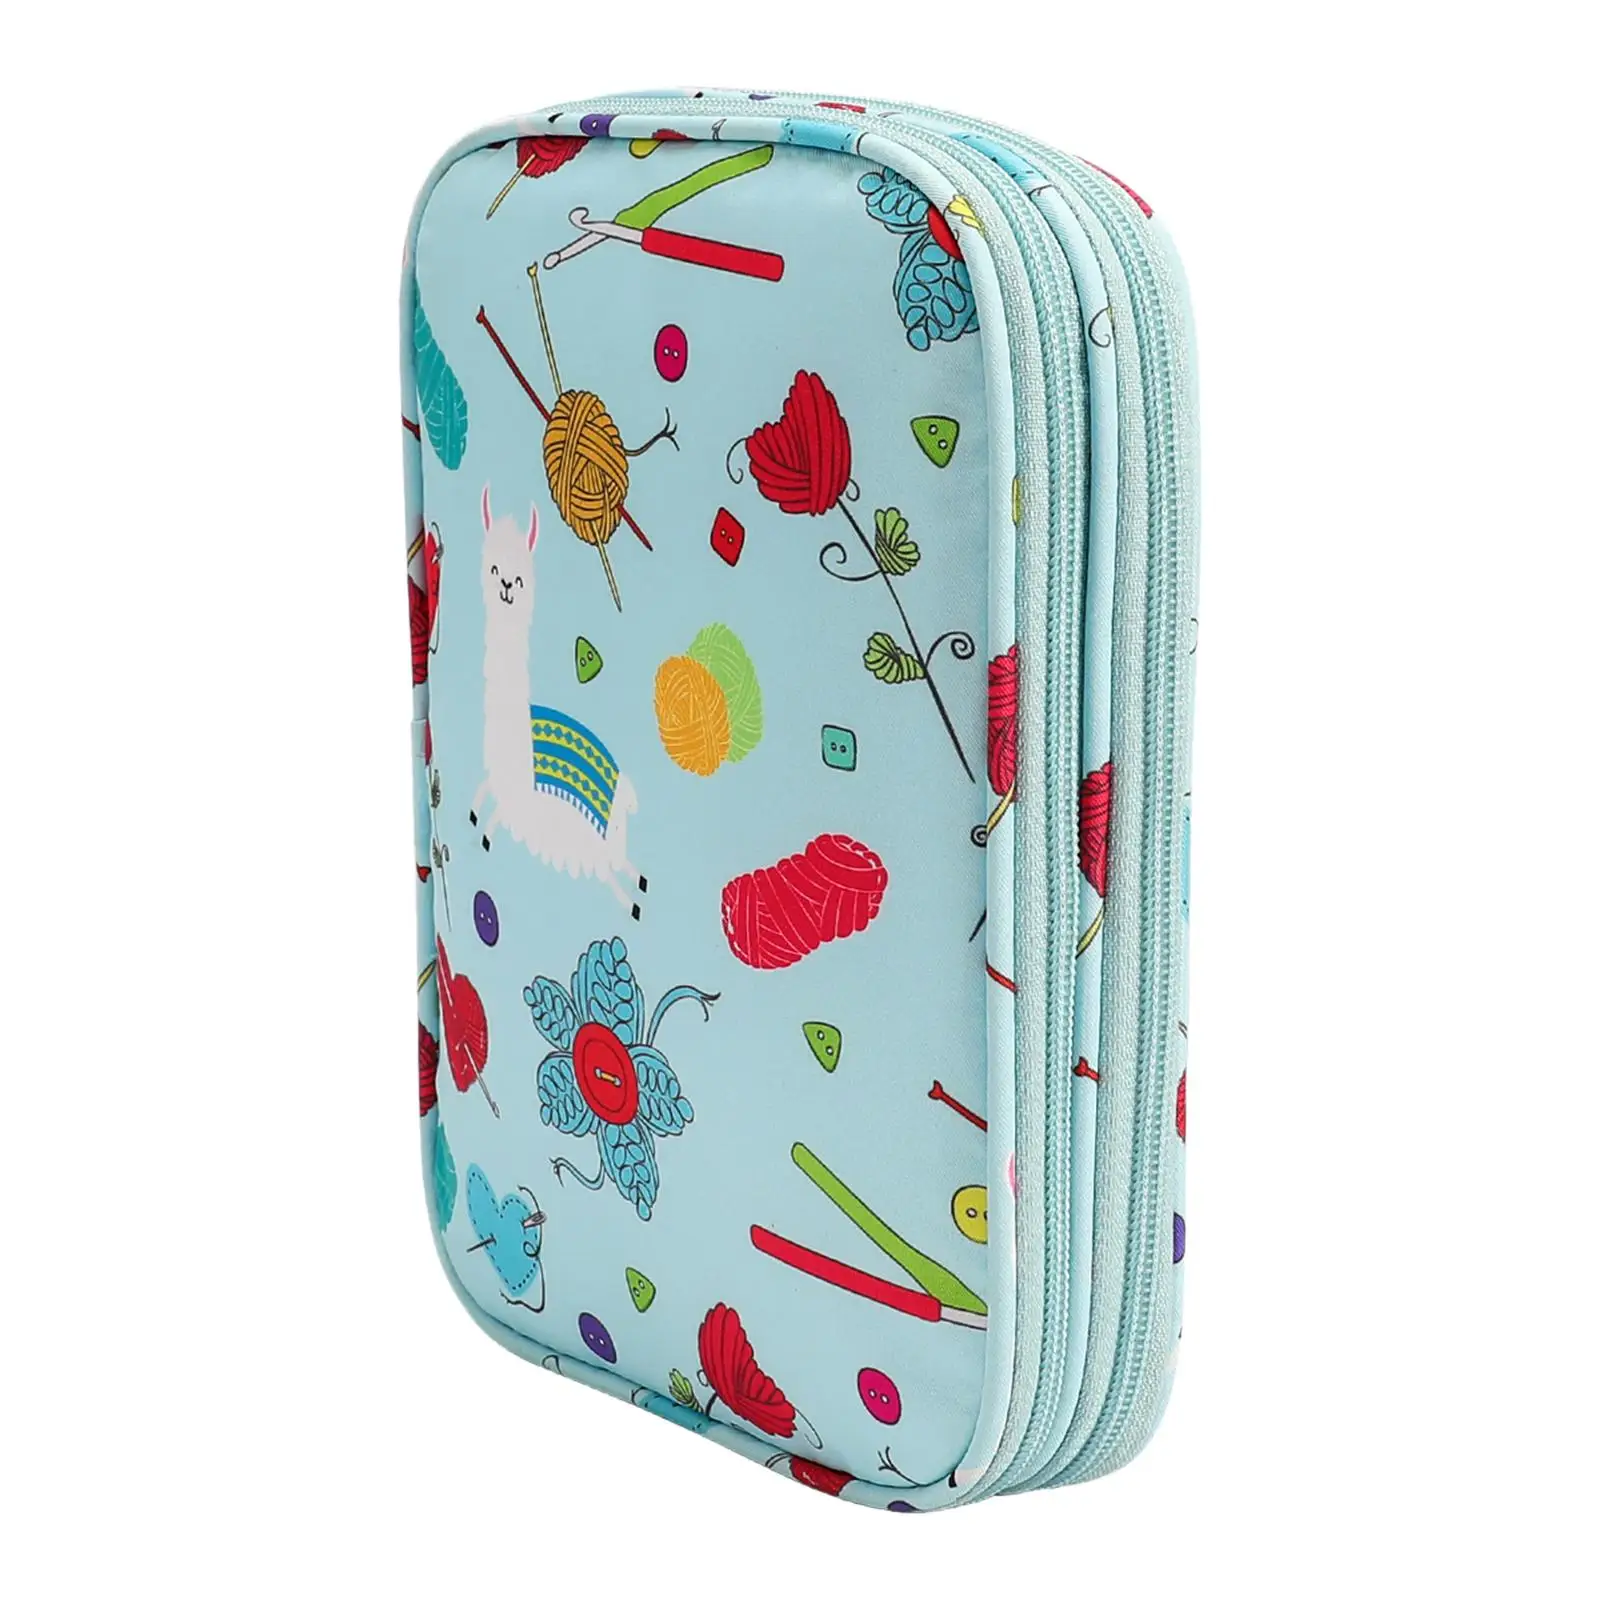 Portable Crochet Hook Case Storage Bag Versatile Double Layer Interior Compartment with Holder Slots for Everywhere Knitting